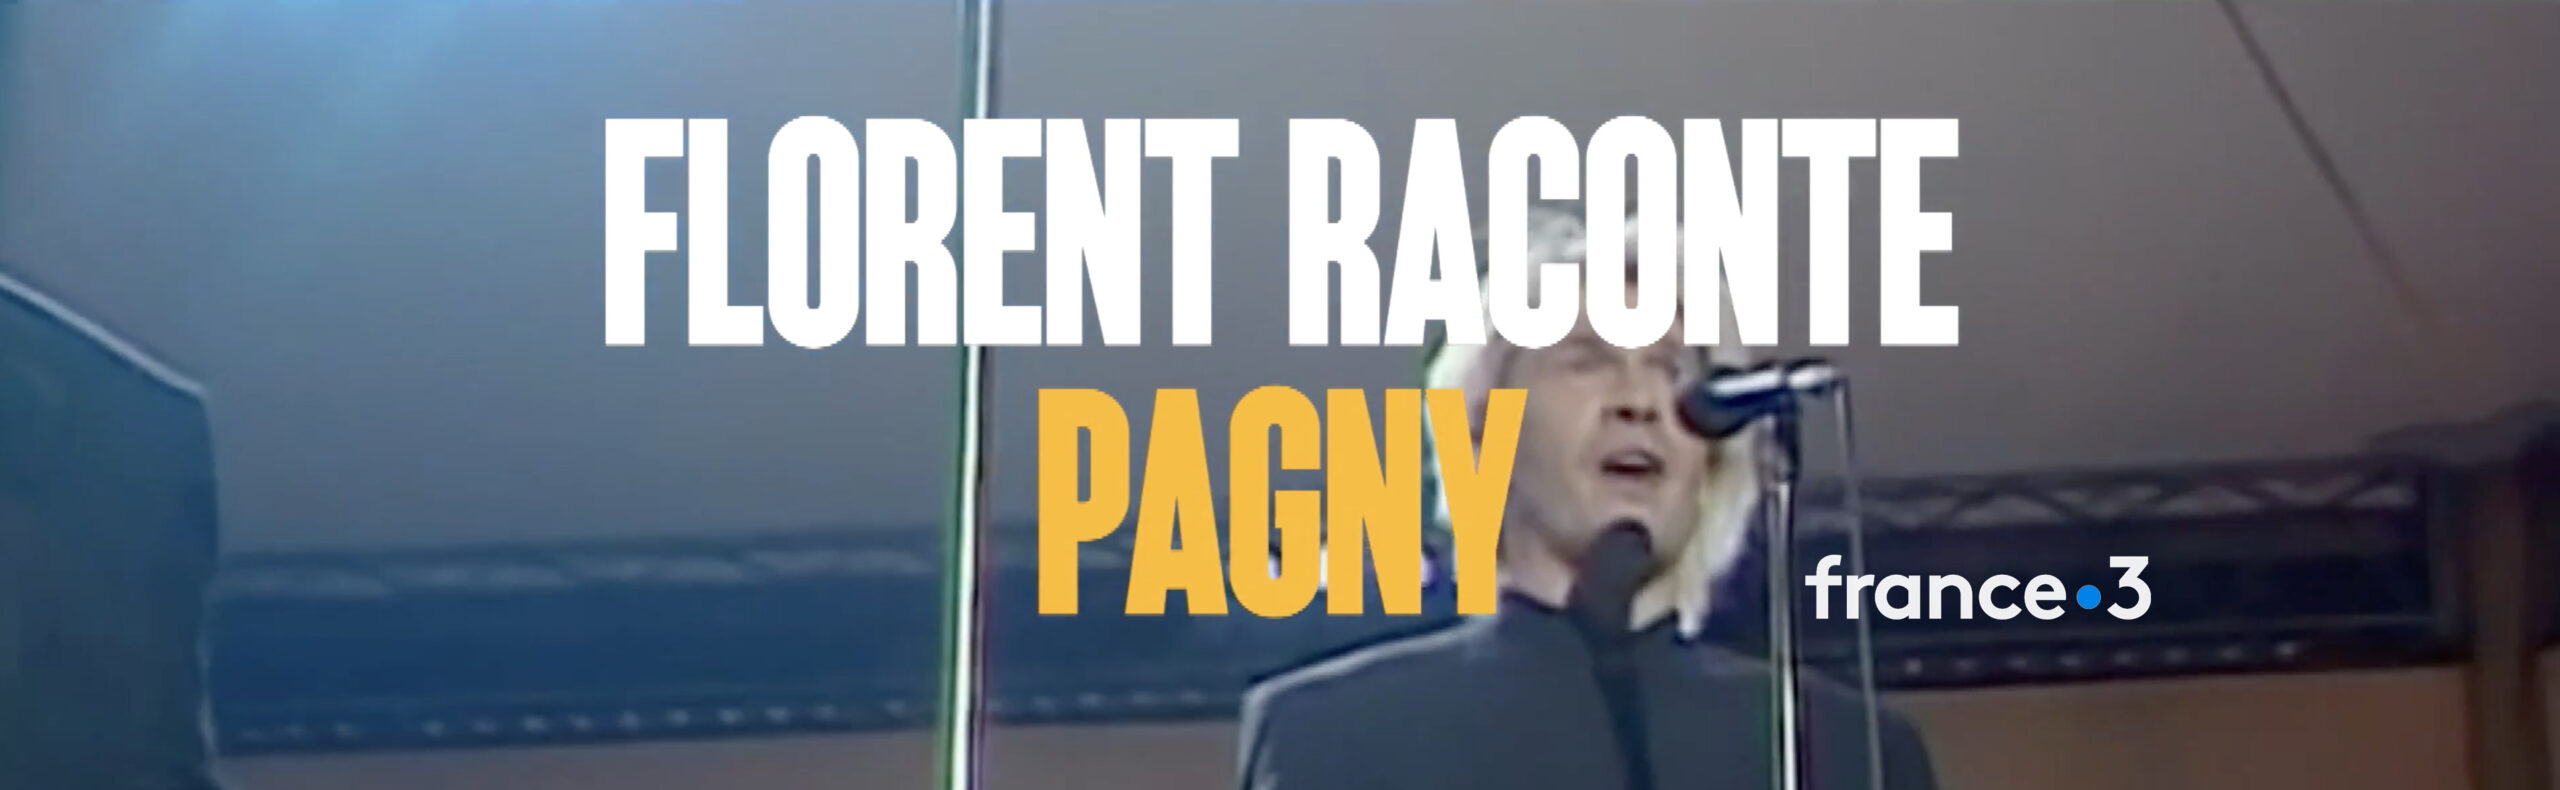 "Florent raconte Pagny" inédit france3